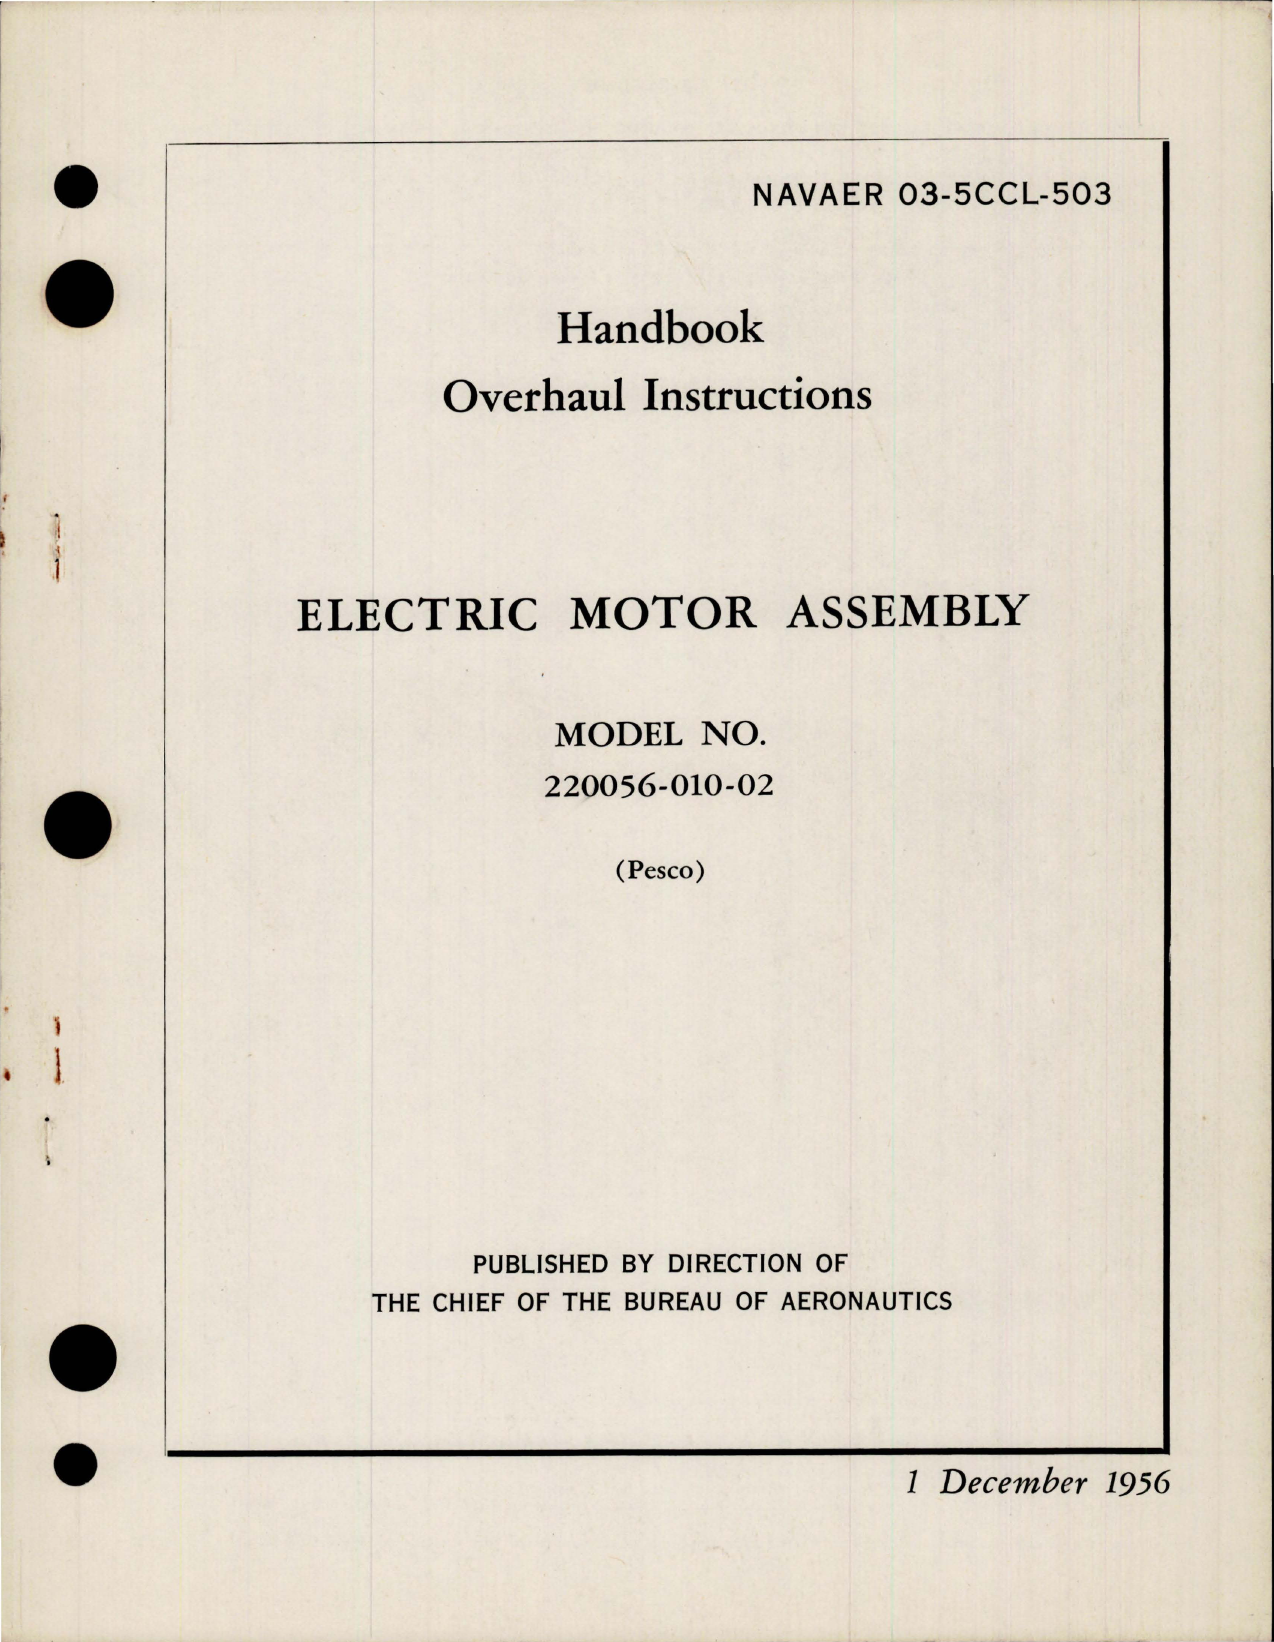 Sample page 1 from AirCorps Library document: Overhaul Instructions for Electric Motor Assembly - Model 220056-010-02 